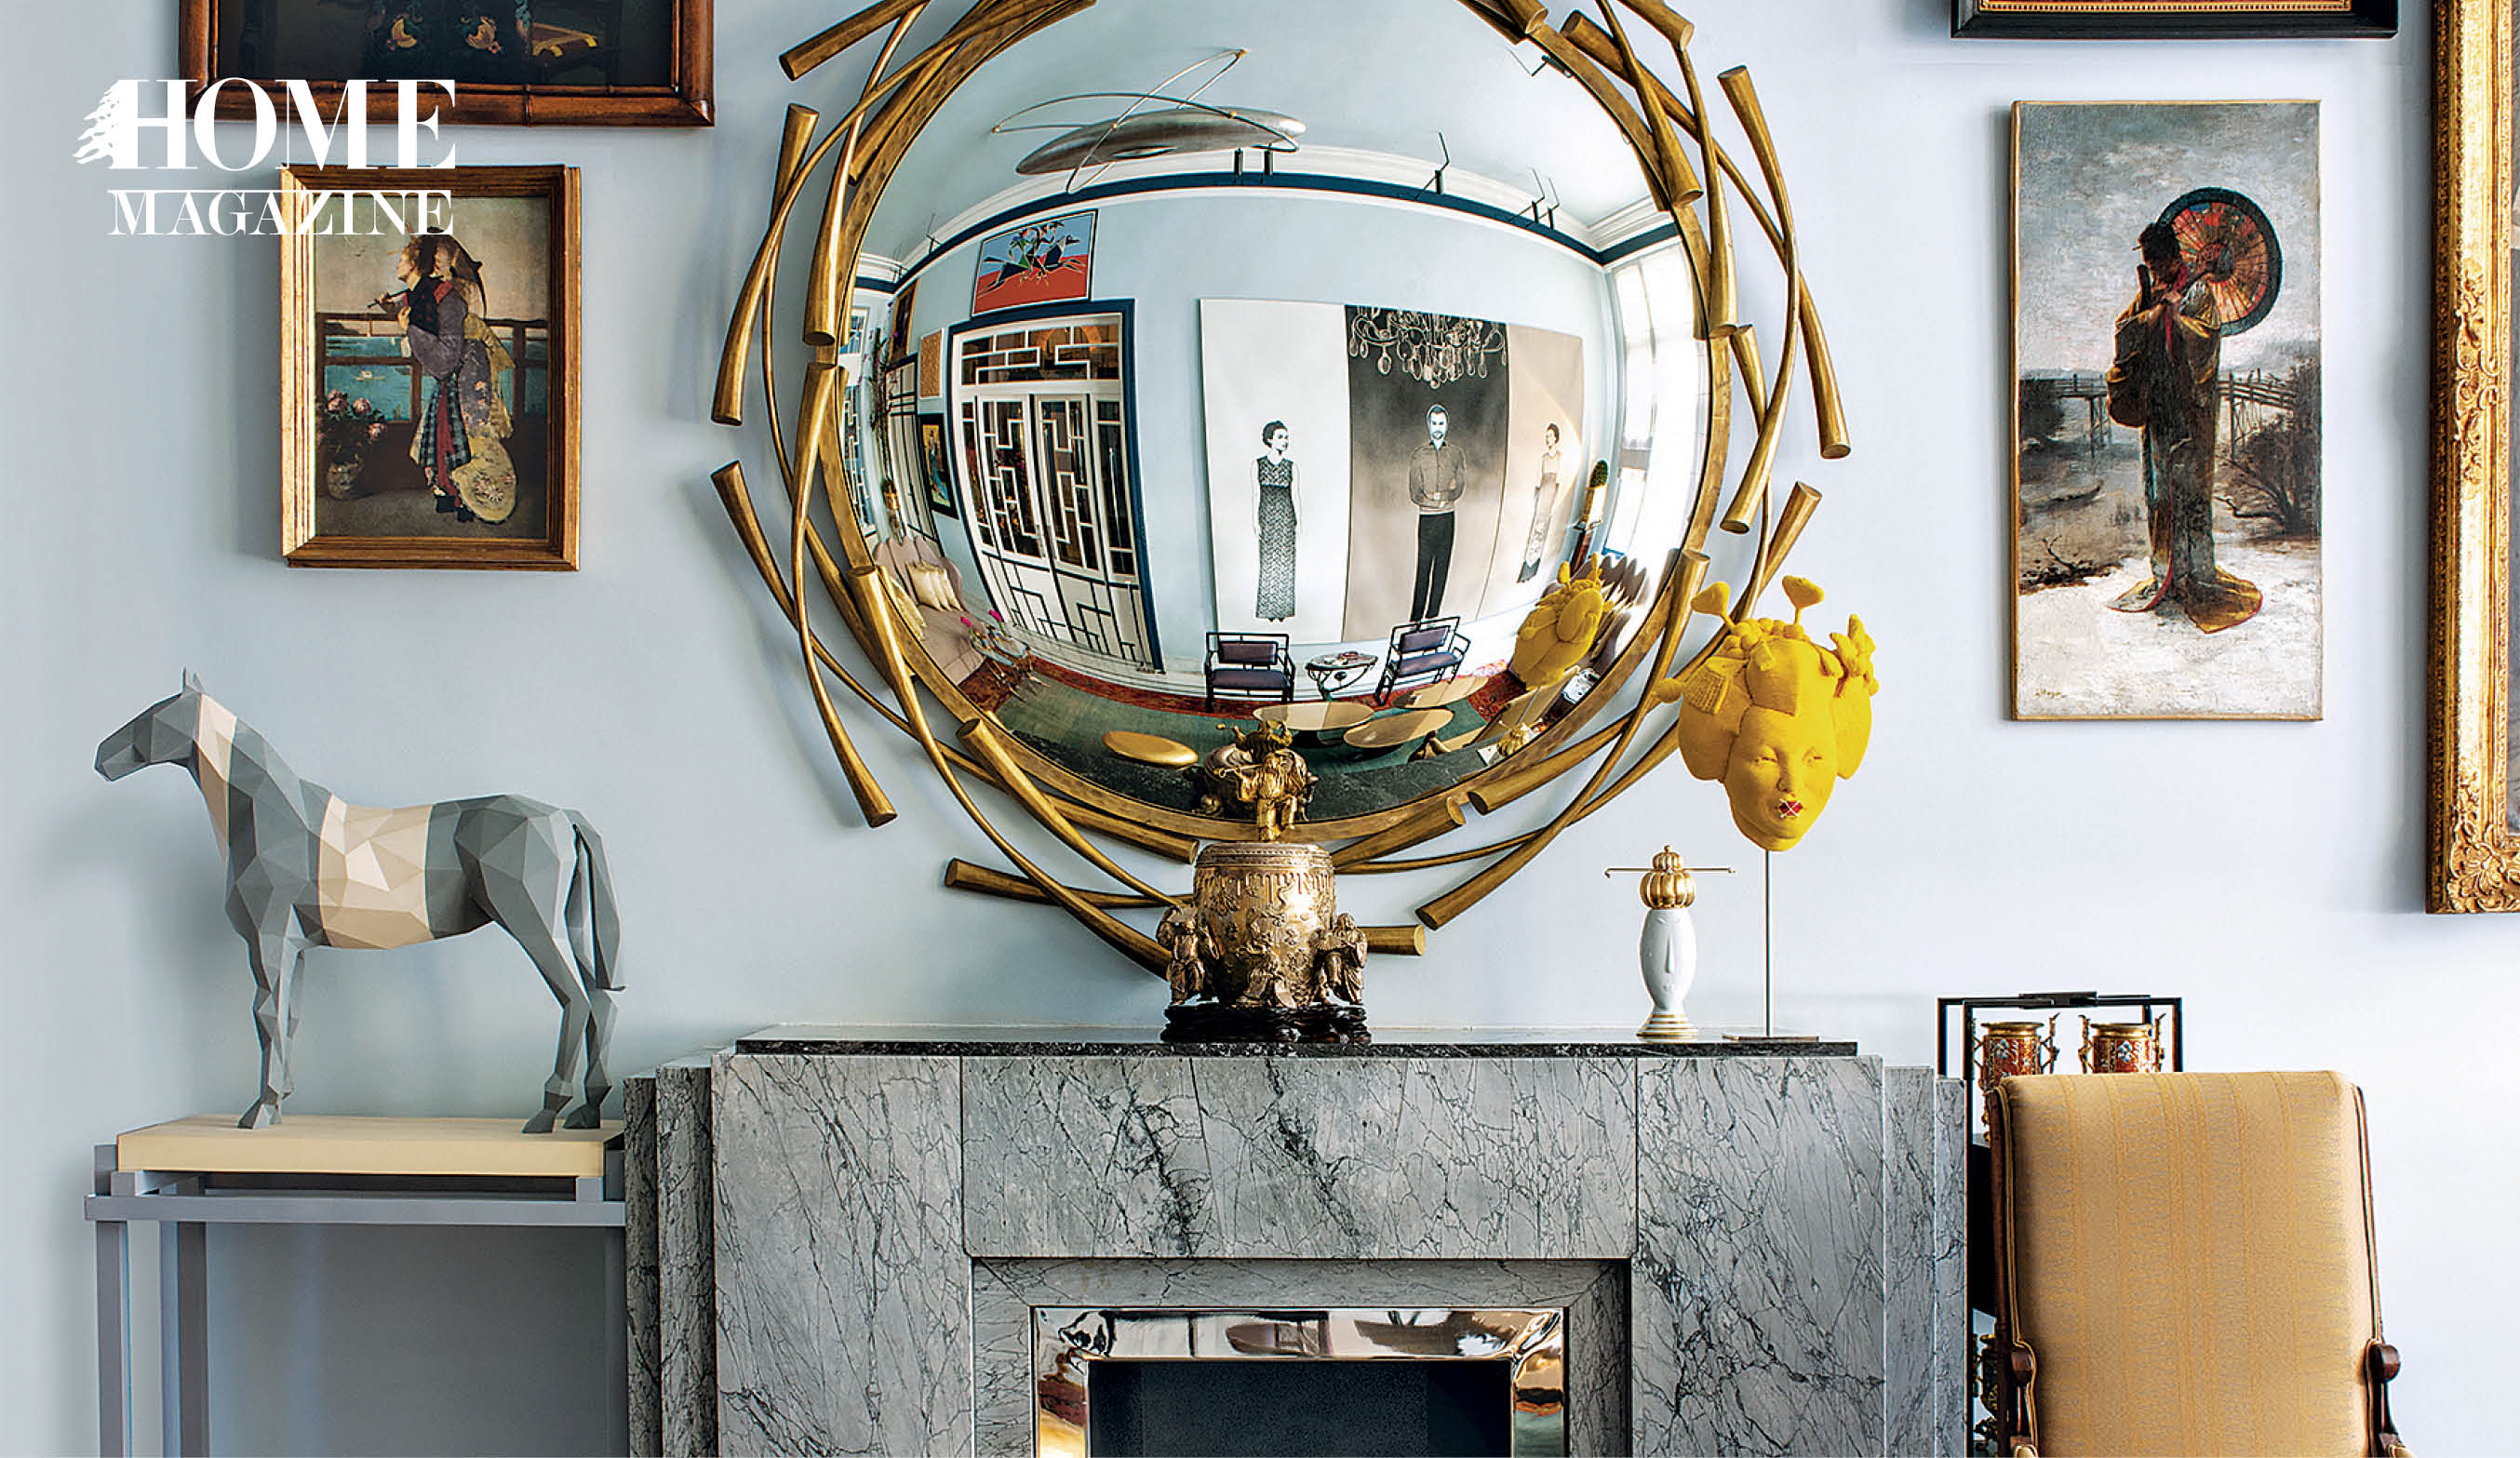 Round mirror, pictures on wall, table, chair, horse statue,chimney